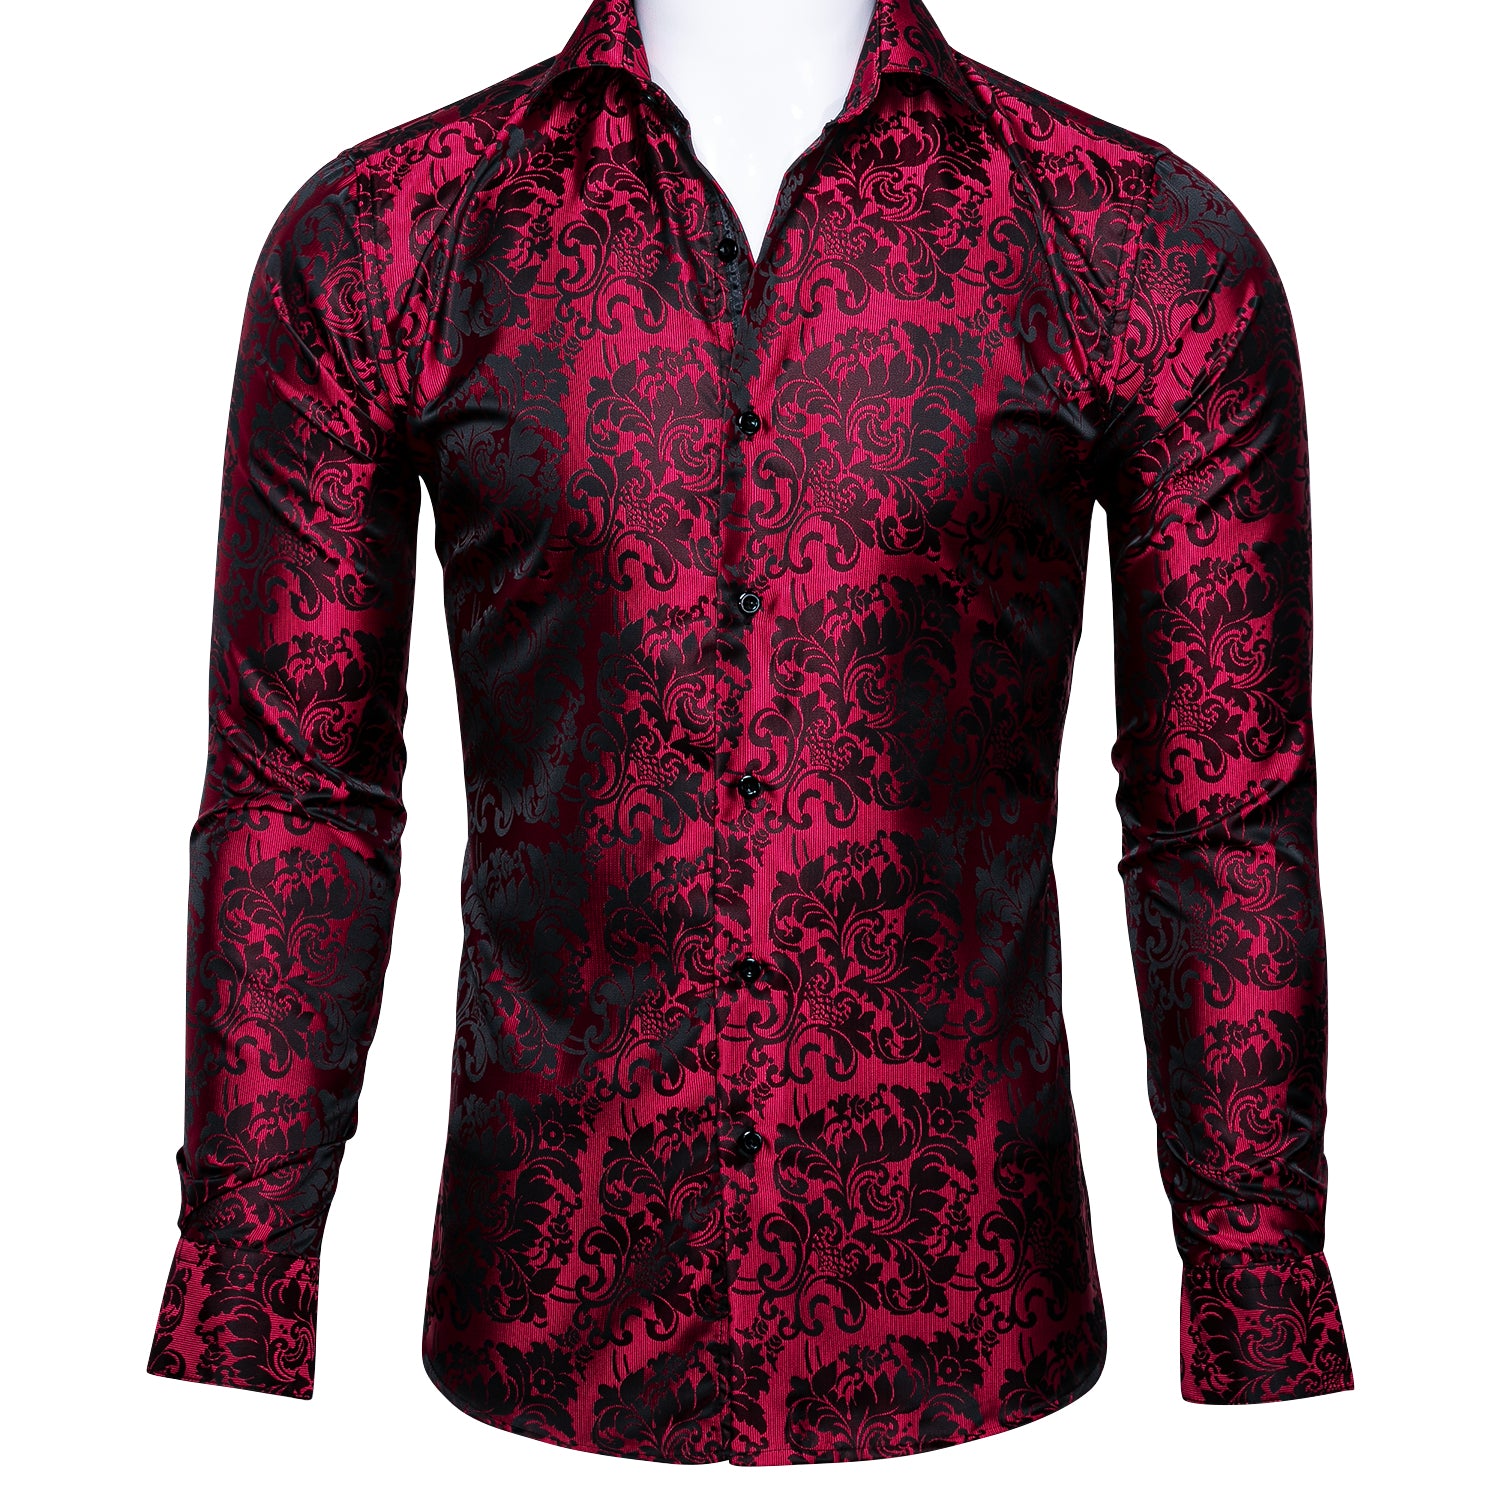 Barry.wang Red Black Floral Shirt